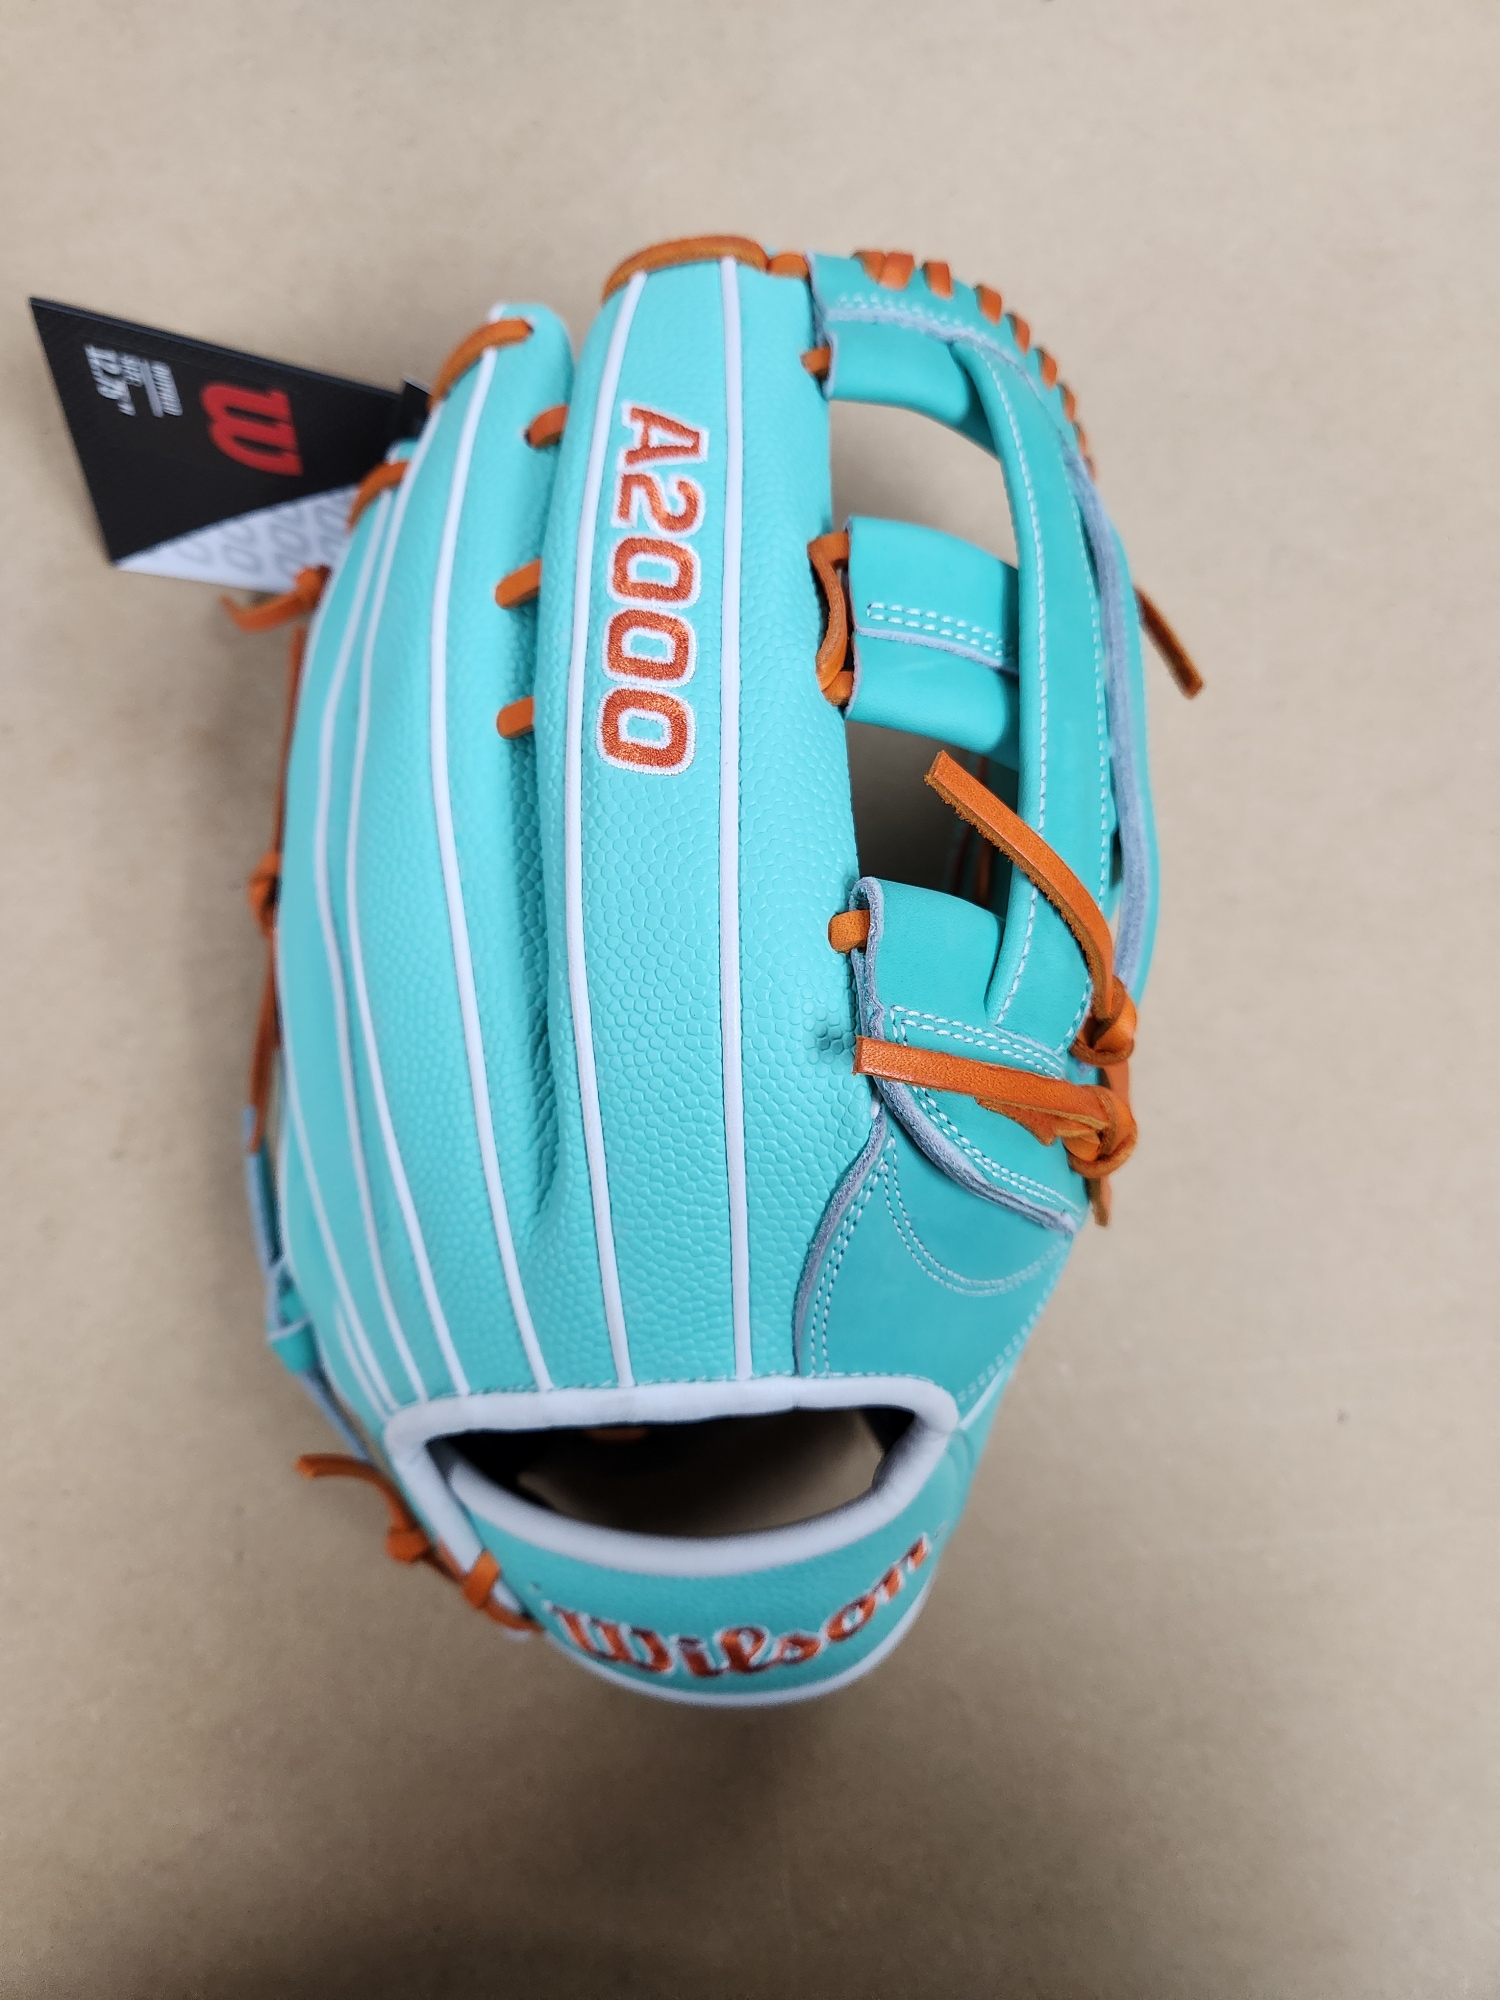 New Wilson February 2024 GOTM Right Hand Throw Outfield A2000 Baseball Glove 12.75"